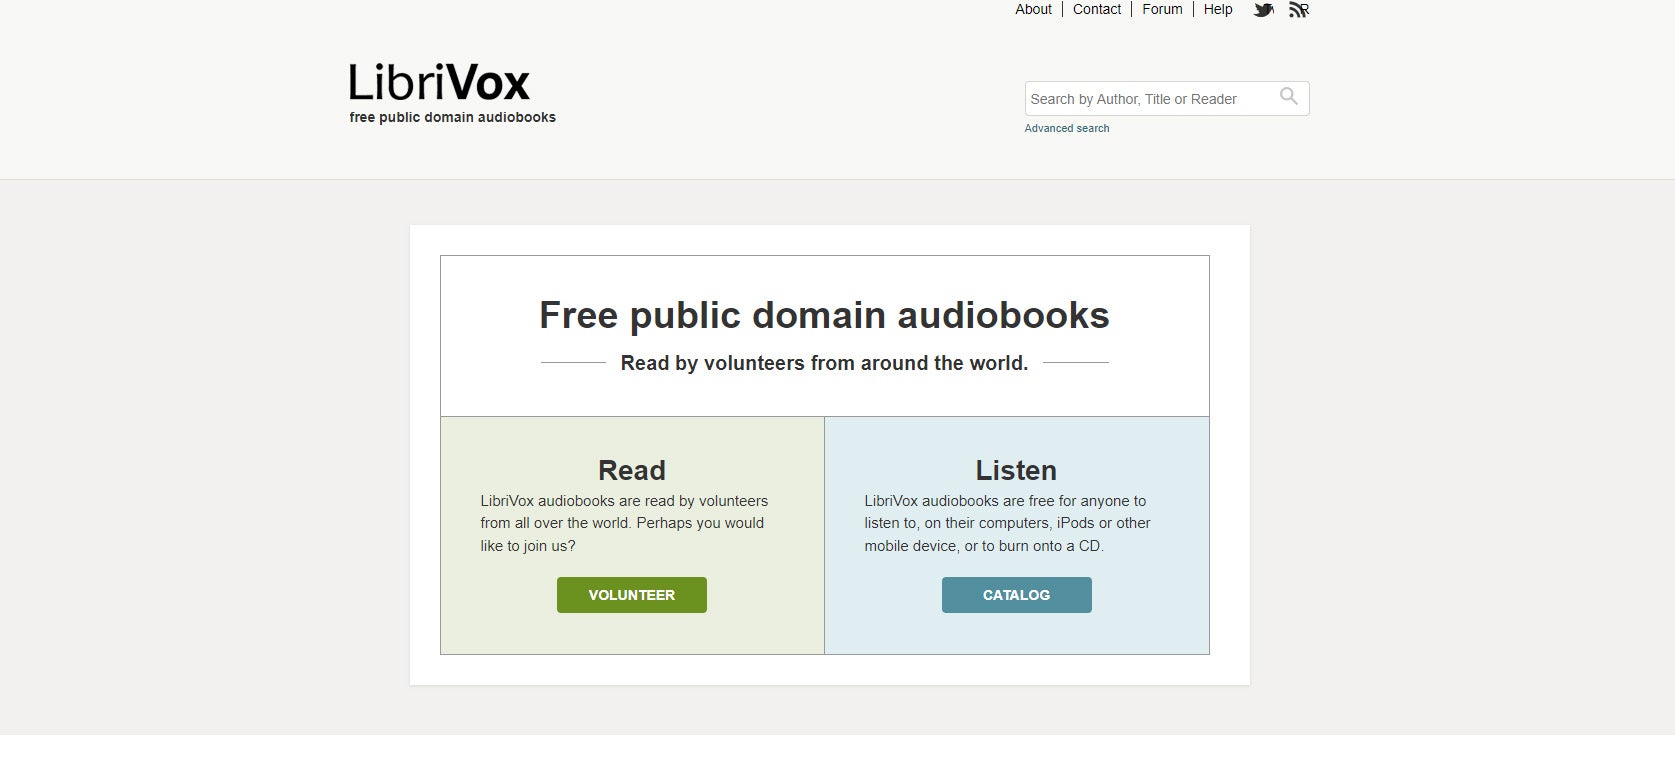 The home page for LibriVox, which is divided into two boxes that explain how users can access public domain books for free.